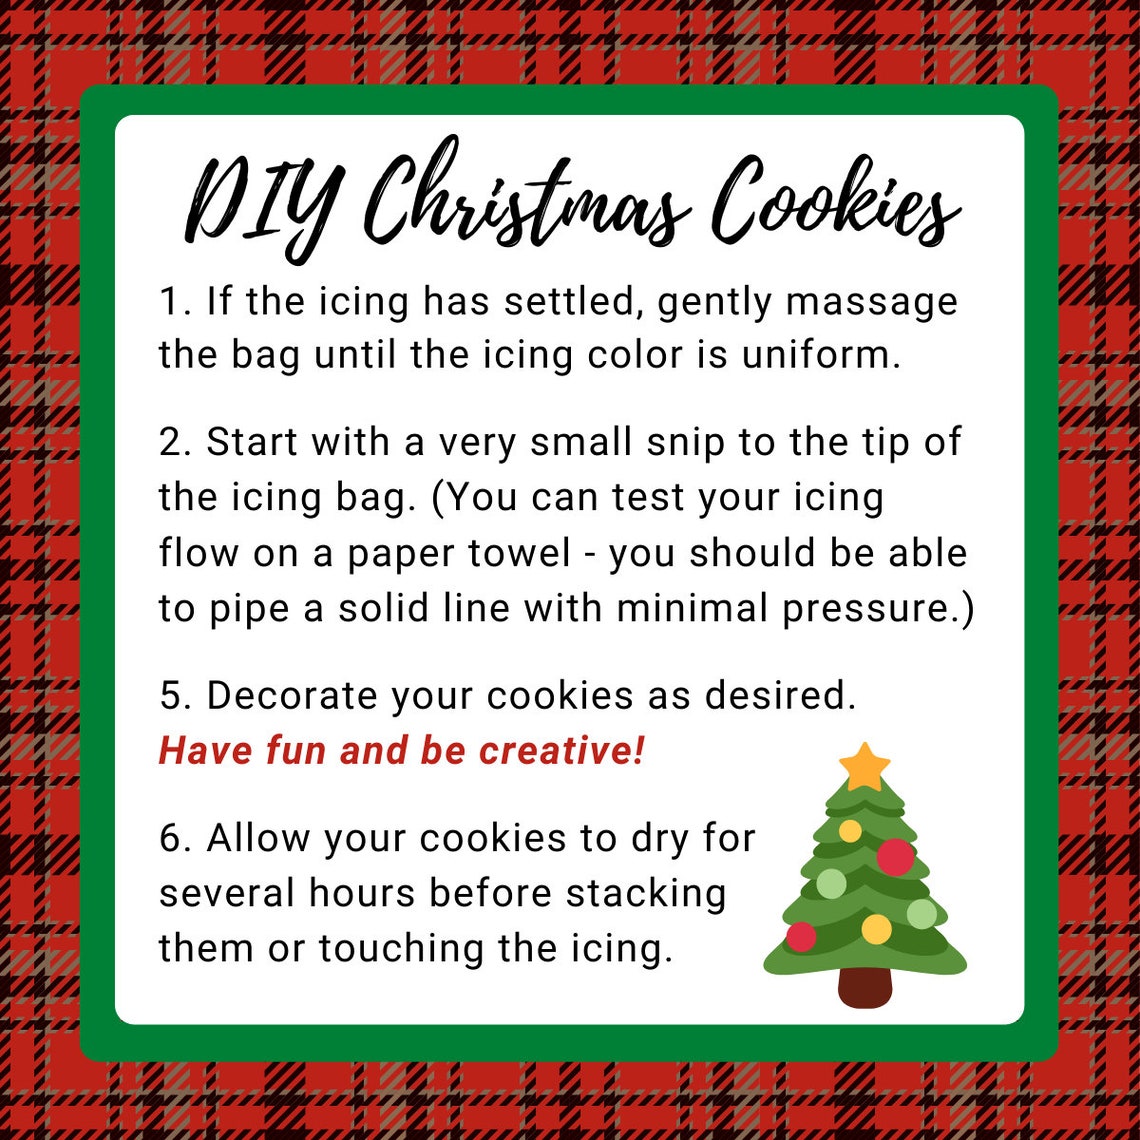 diy-christmas-cookie-kit-instructions-etsy